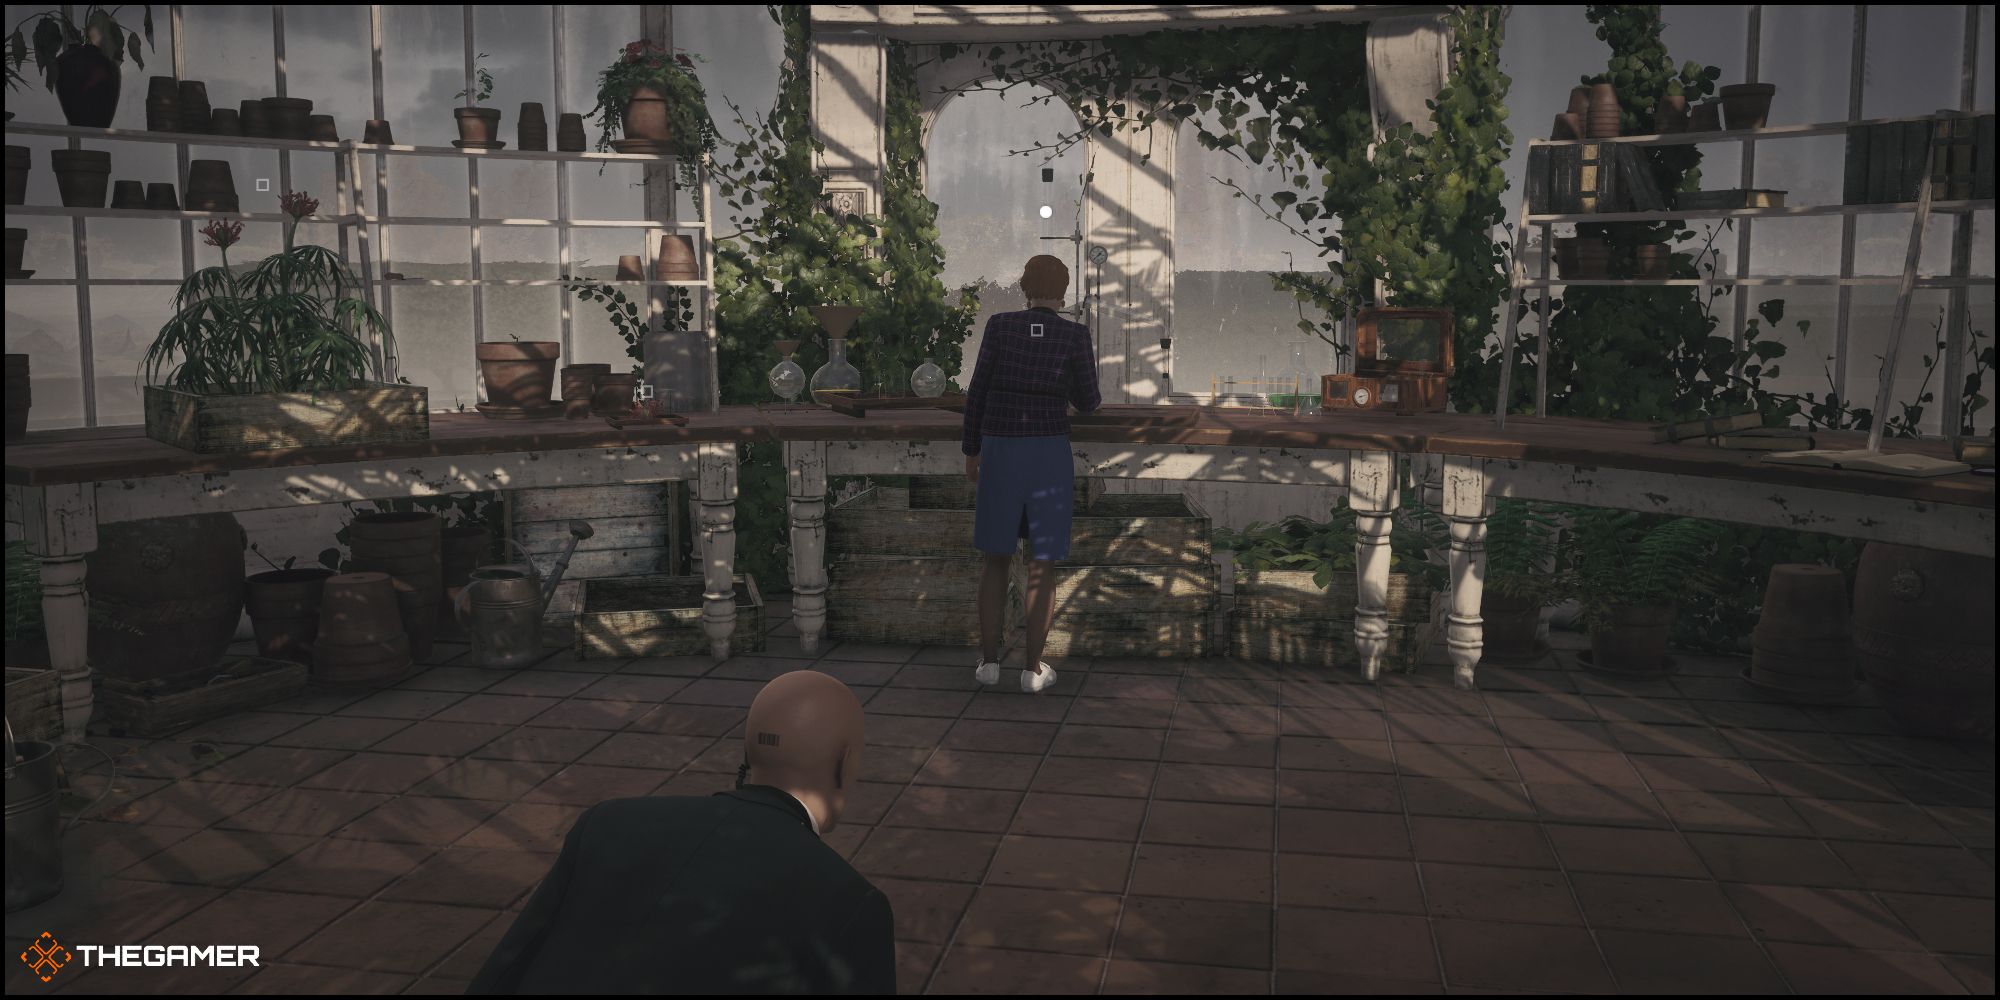 Agent 47 spying on Emma Carlisle while she makes a poison.